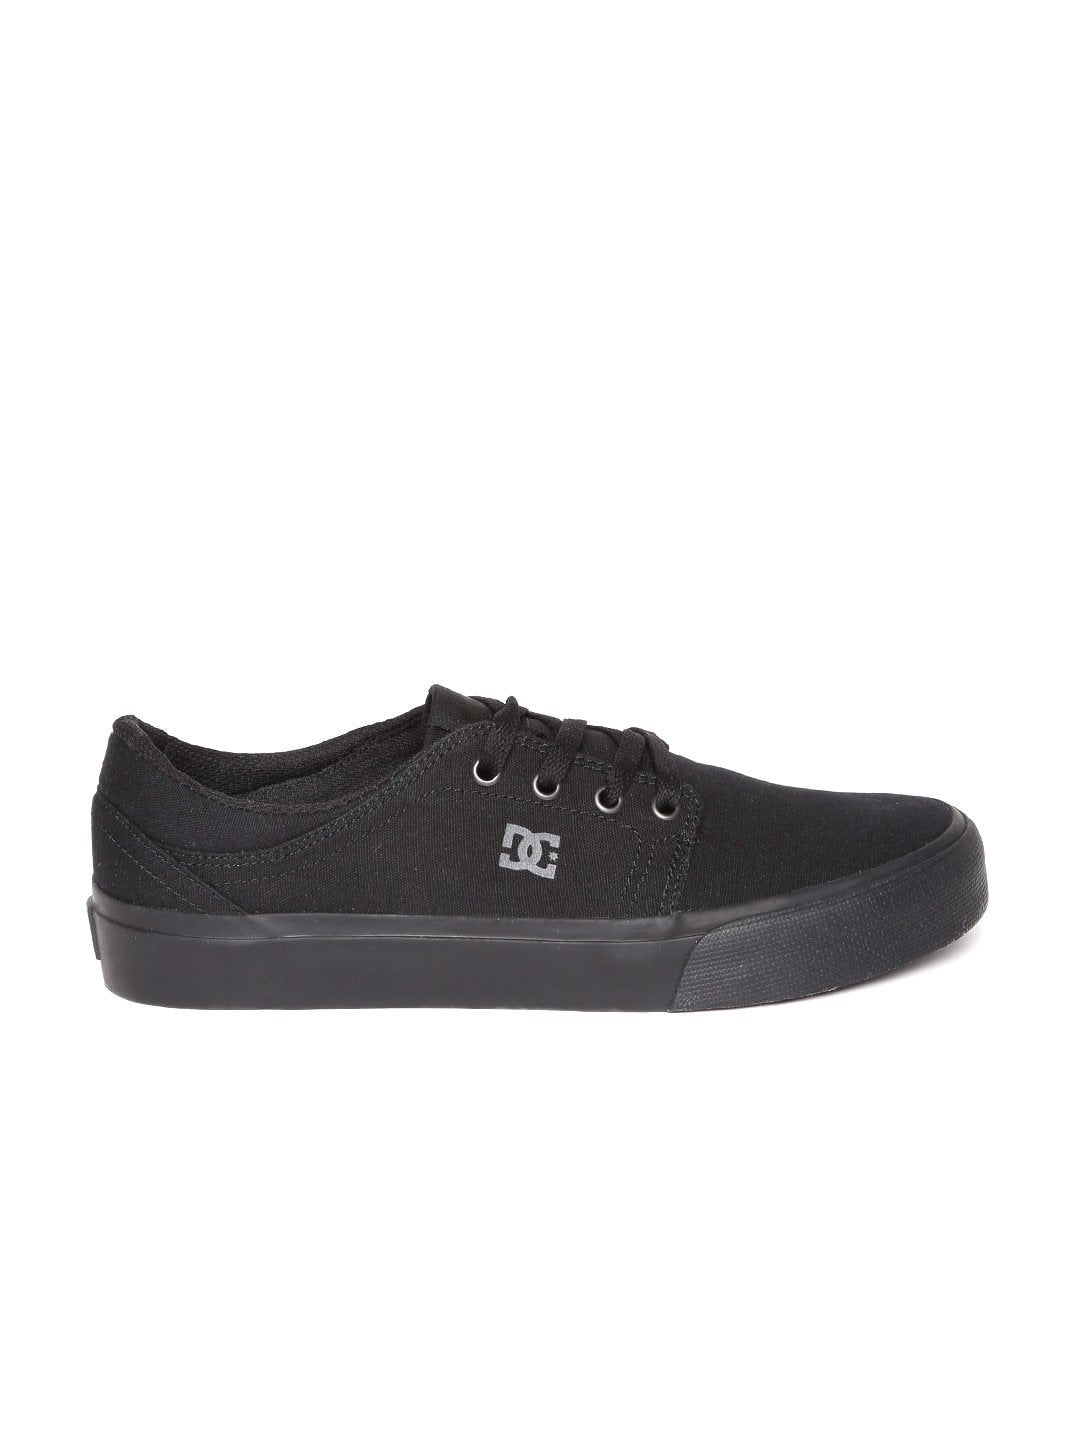 Black Trase TX Sneakers - Discount Store